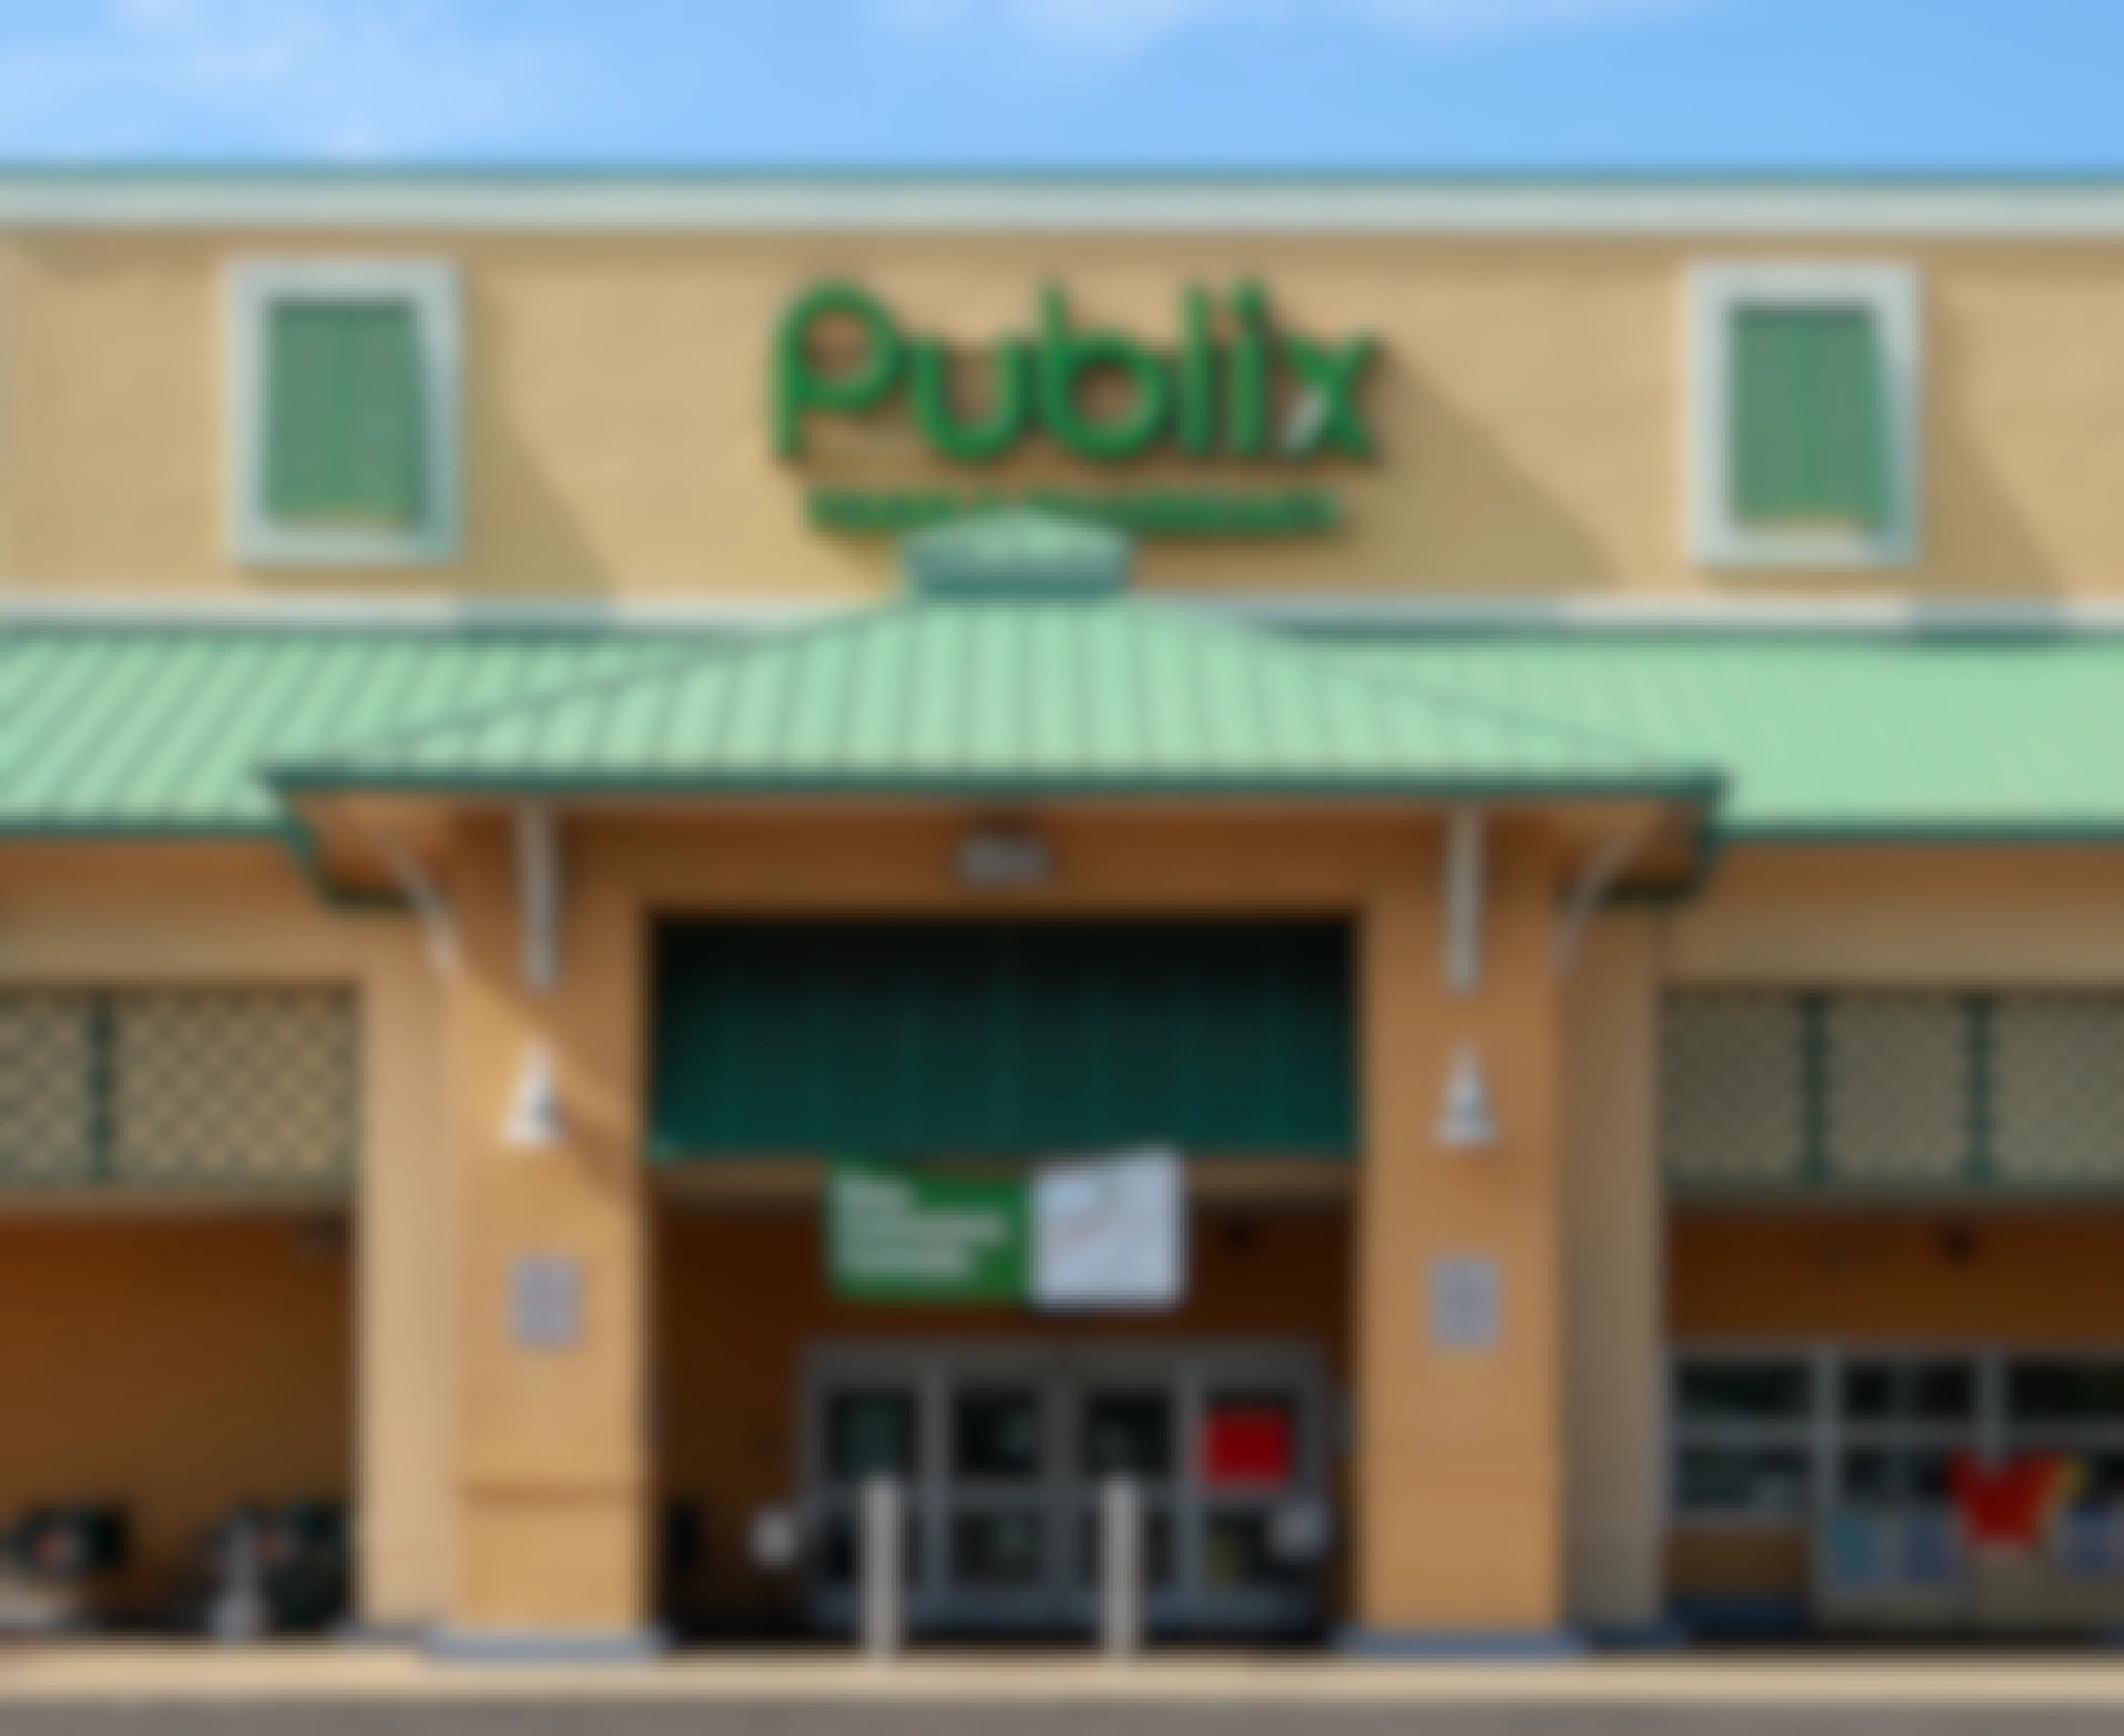 The front of a Publix grocery store.